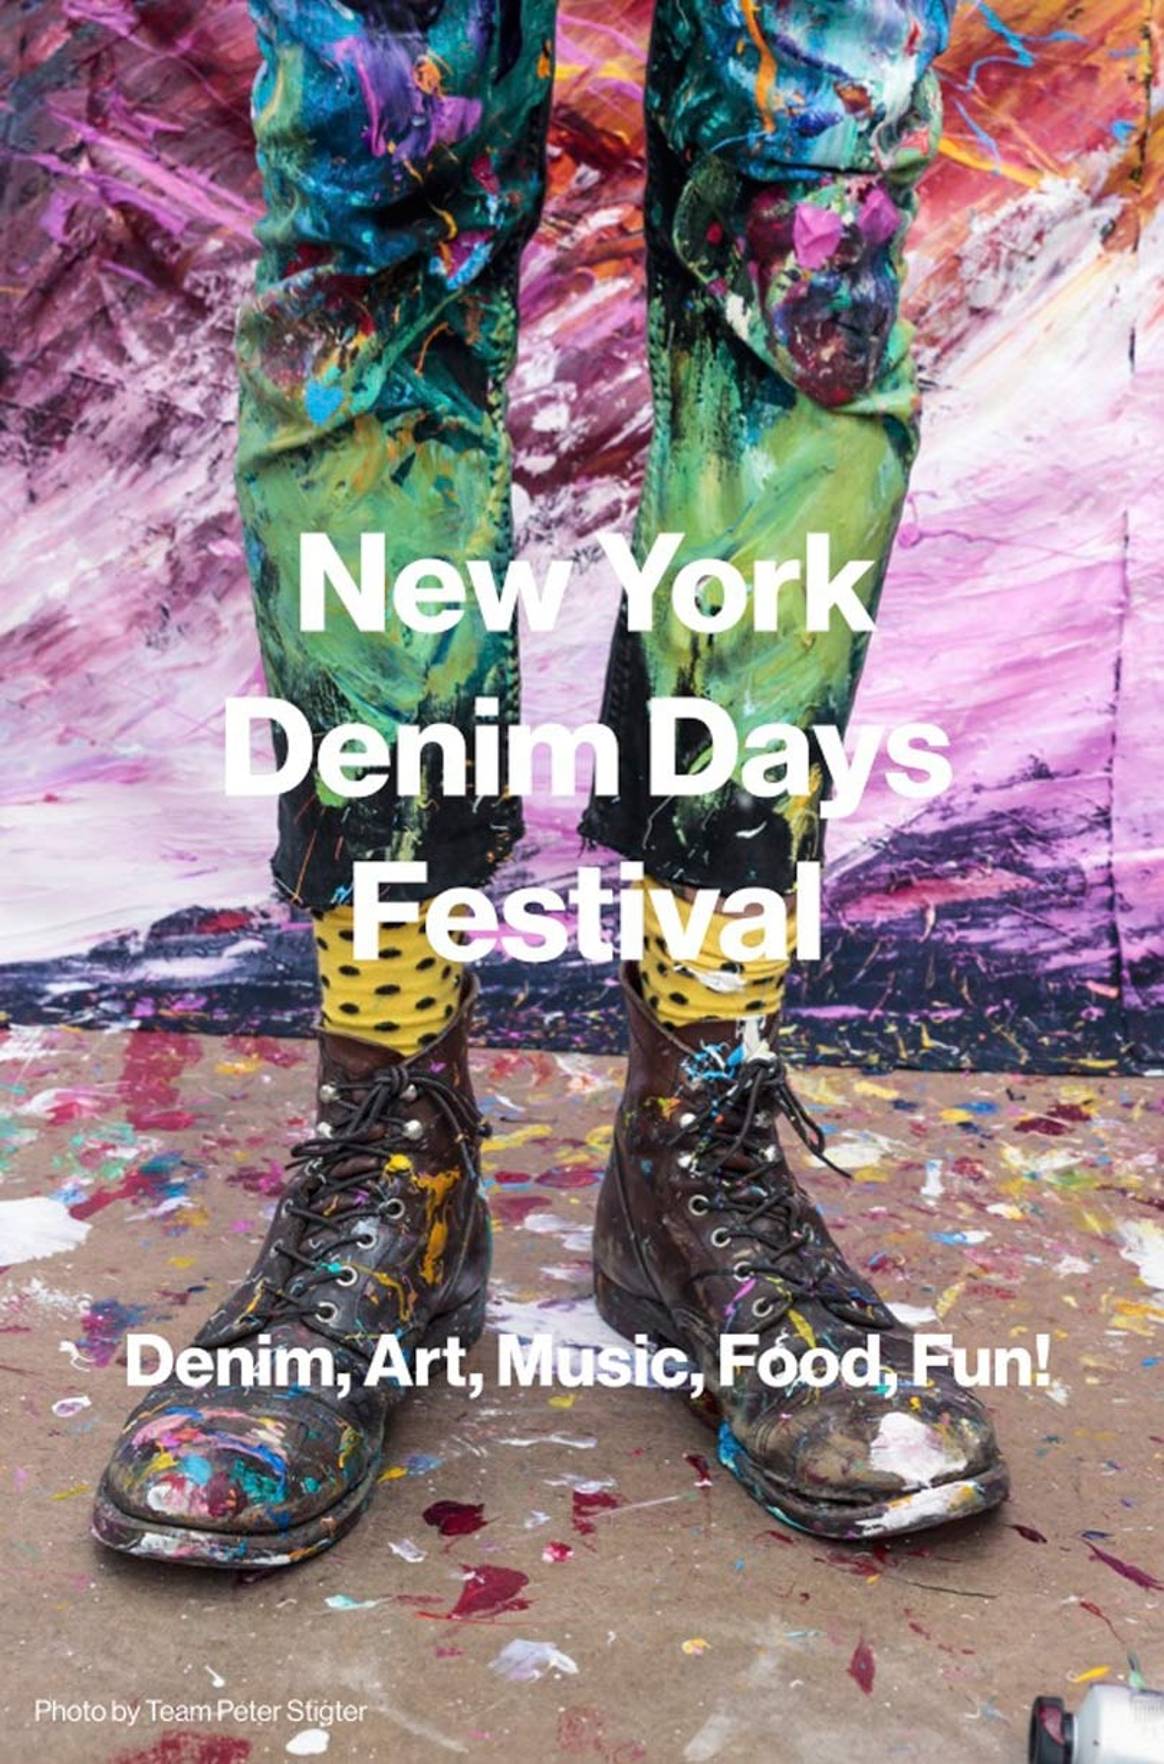 NY Denim Days Brand Roster Expands, Adds Denim Bigwigs To List Of Participants